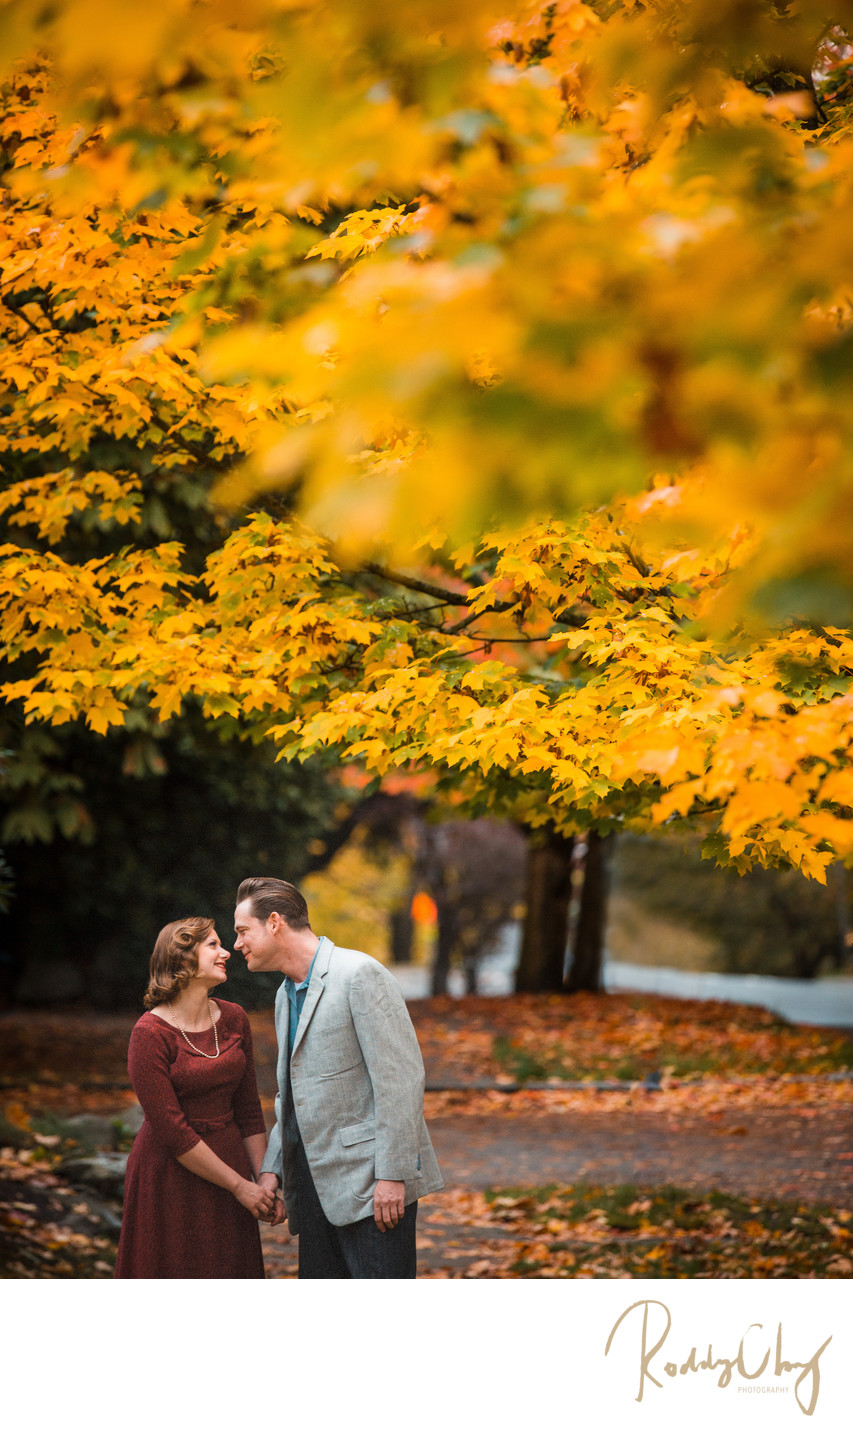 Capitol Hill Fall Engagement Session